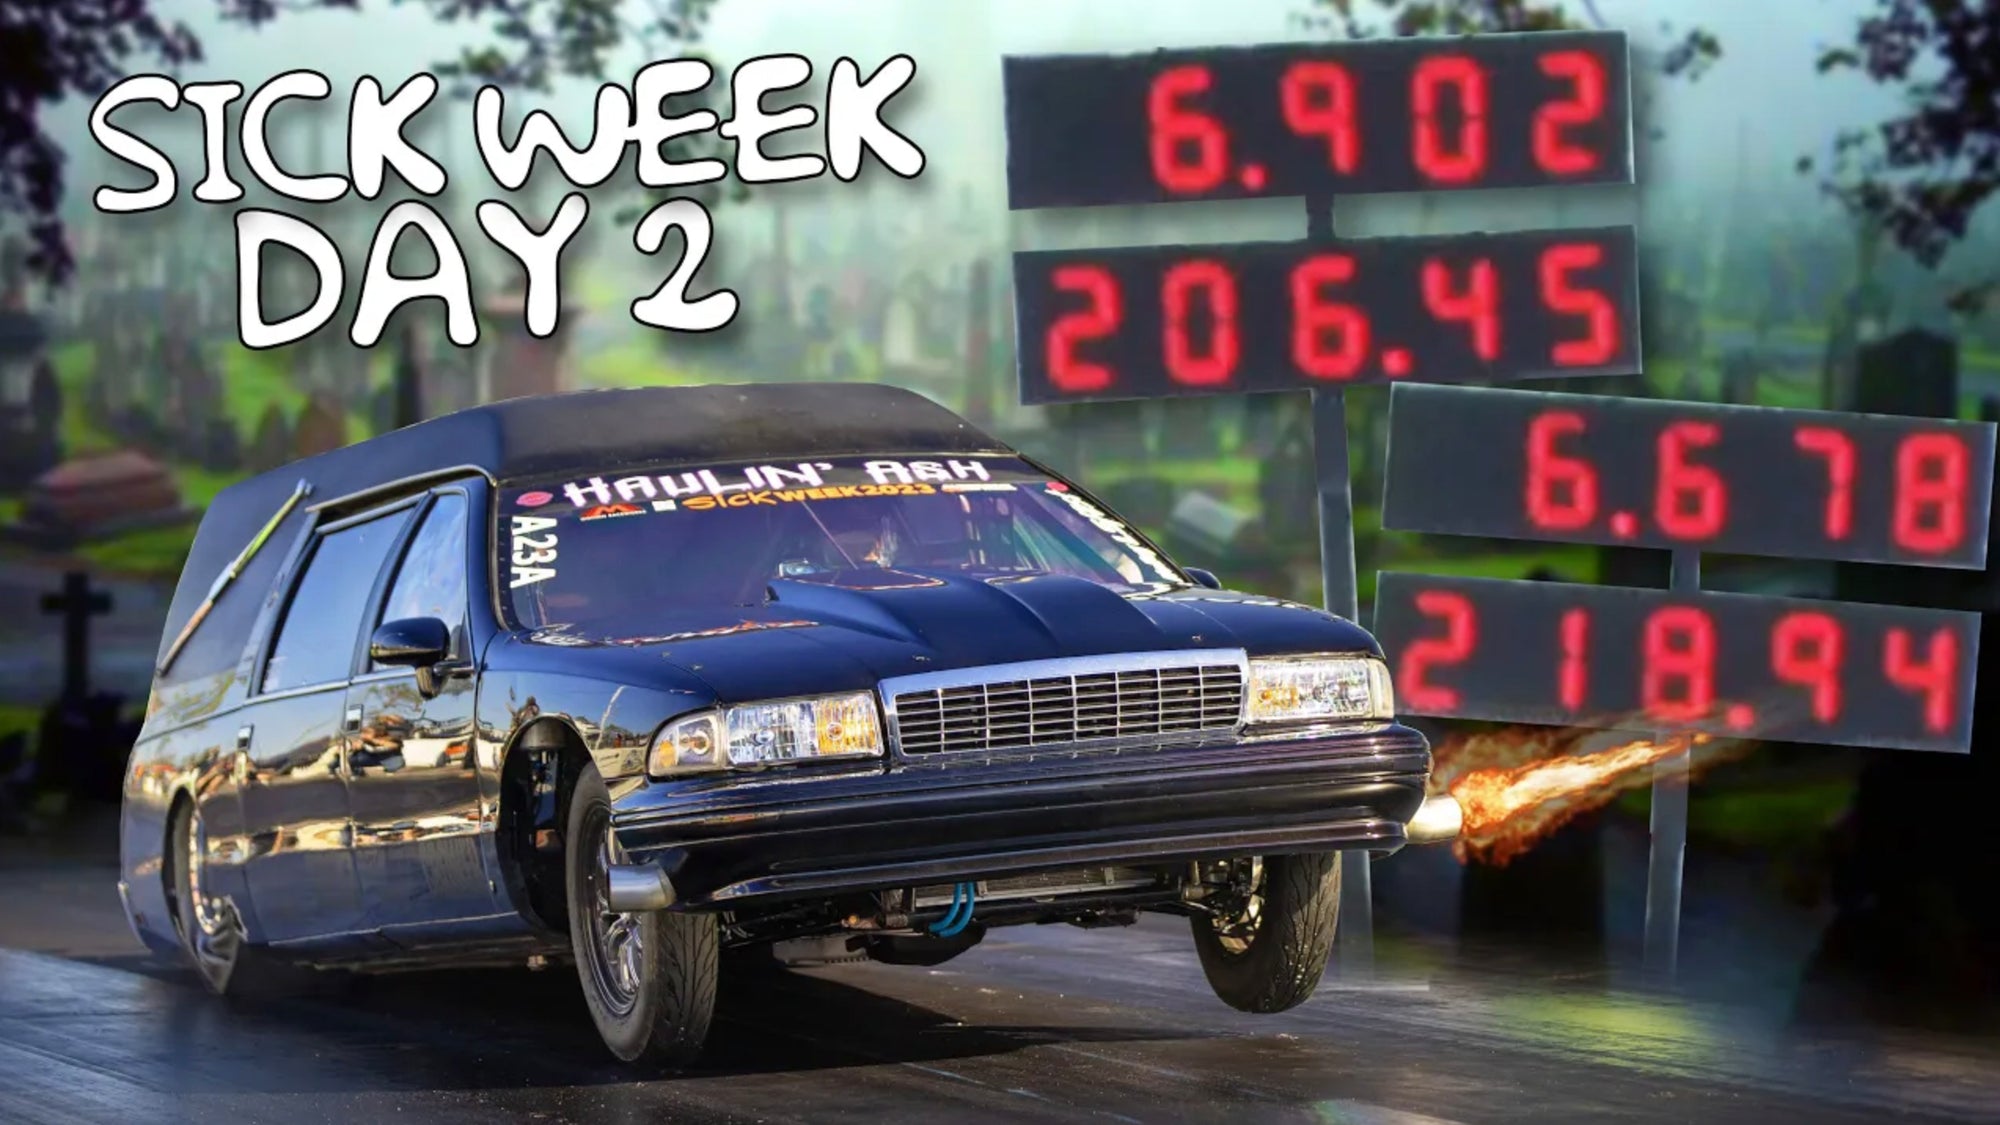 Door flies off at 200mph, trans EXPLOSION, side by side 6's, +MORE! | Sick Week Day 2